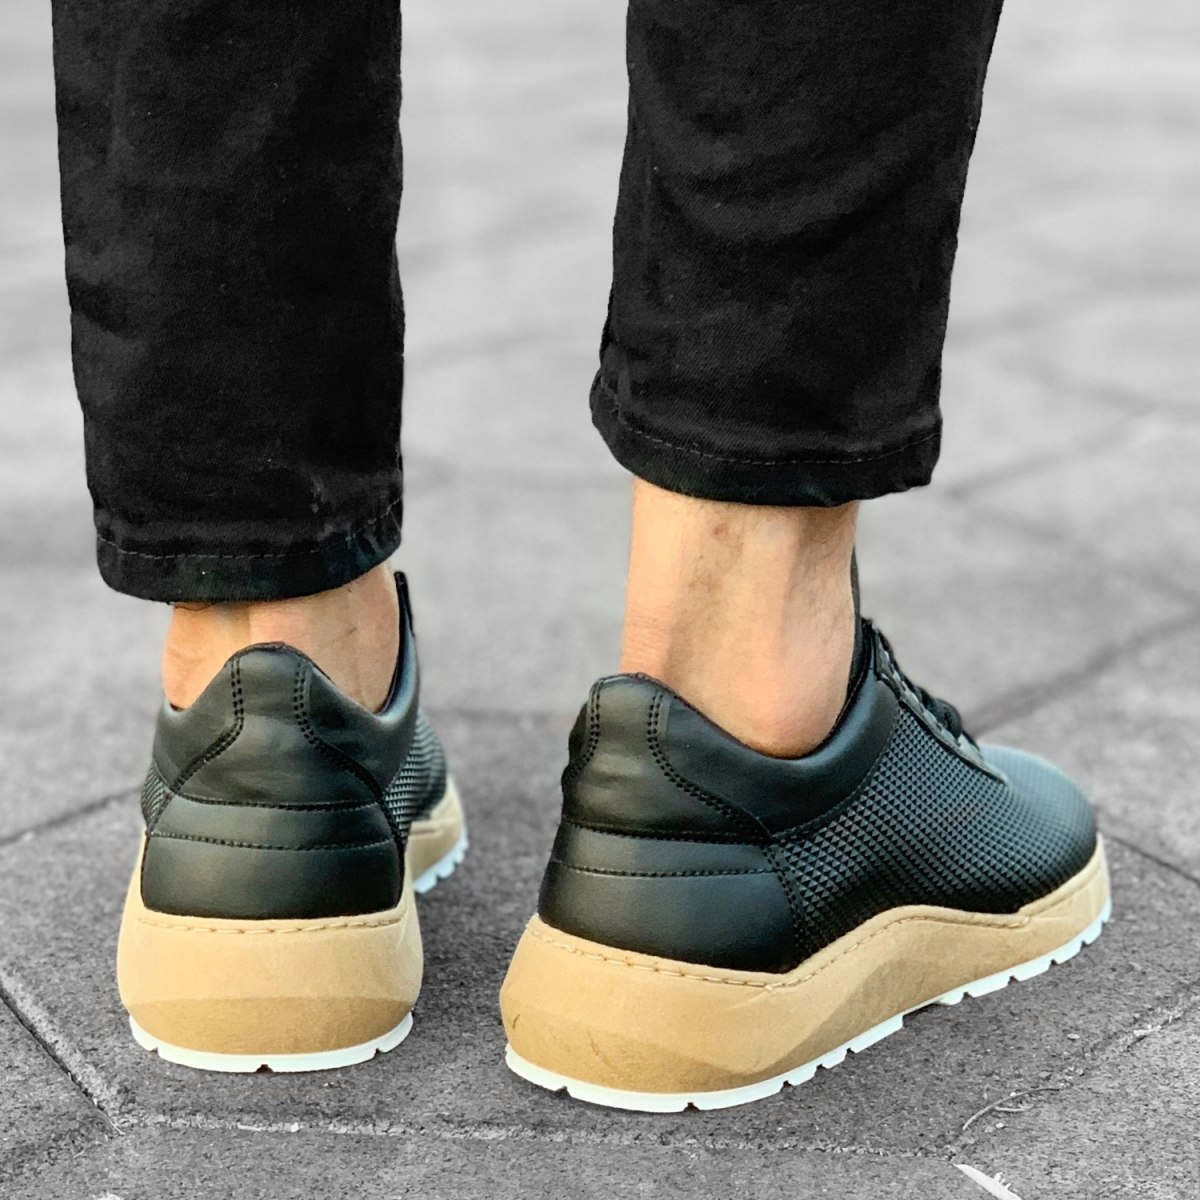 Men’s Dual Tone Chunky Trainers Shoes in Black | Martin Valen